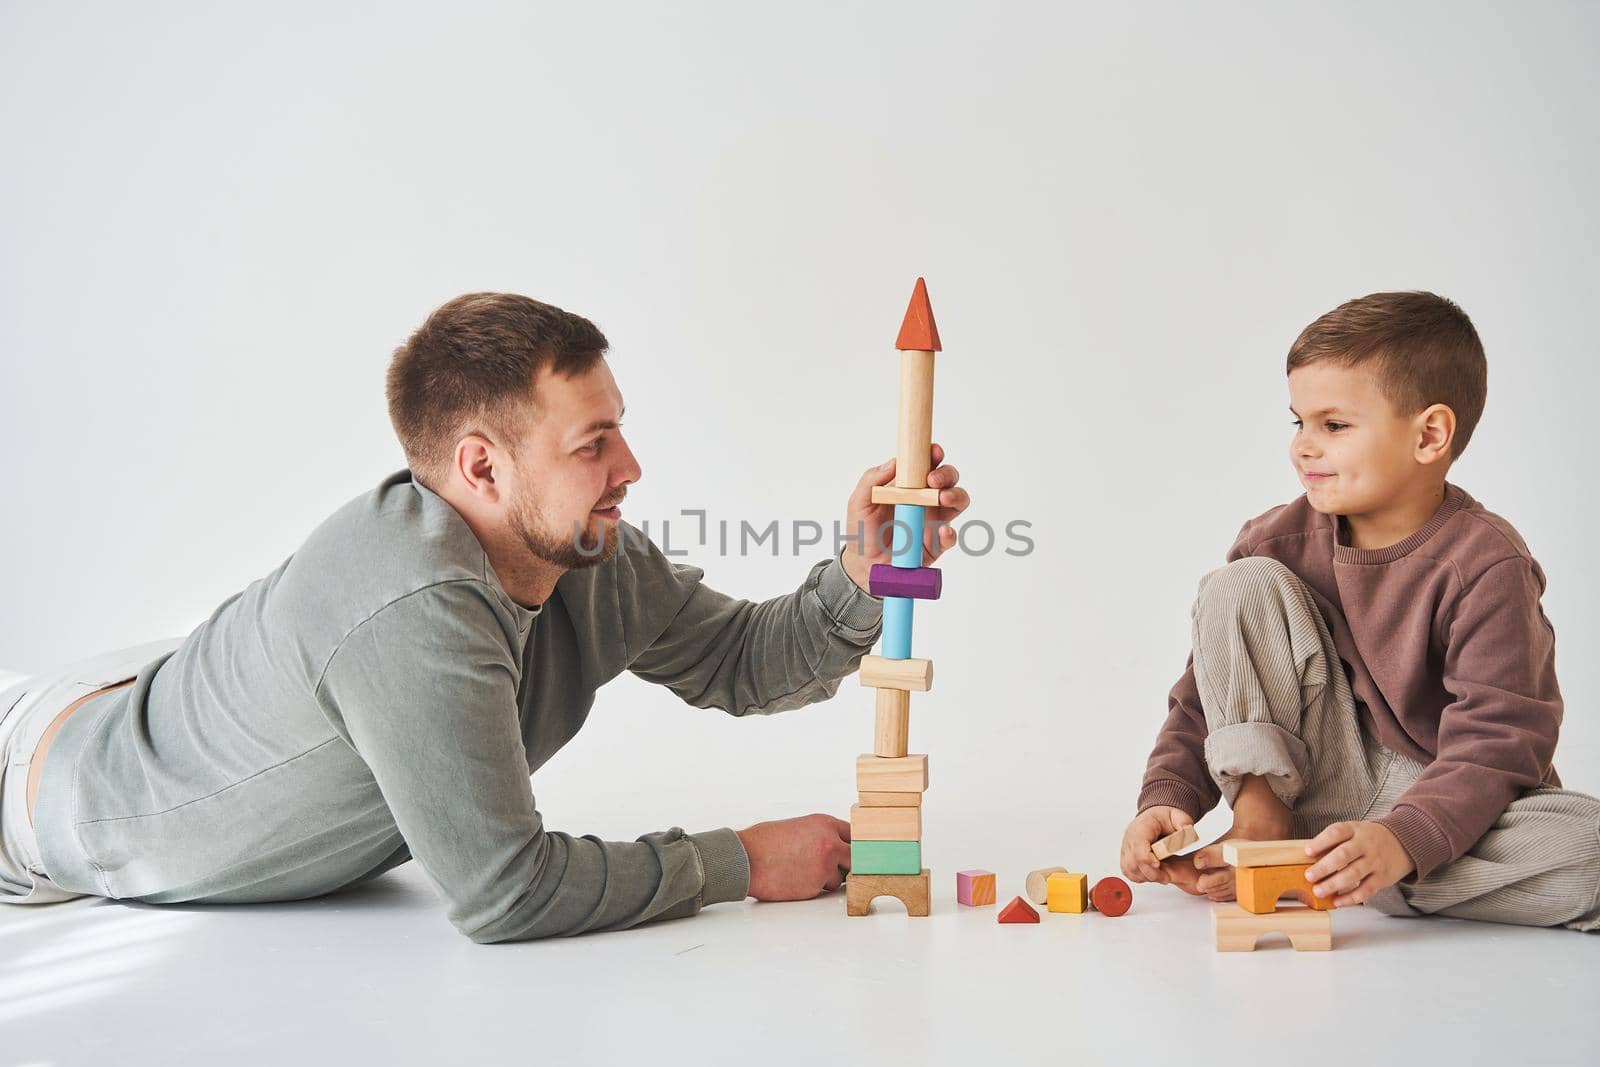 Caring dad helps his son to play on the floor on white background. Father and child build tower of colorful wooden bricks and have fun together. by Rabizo